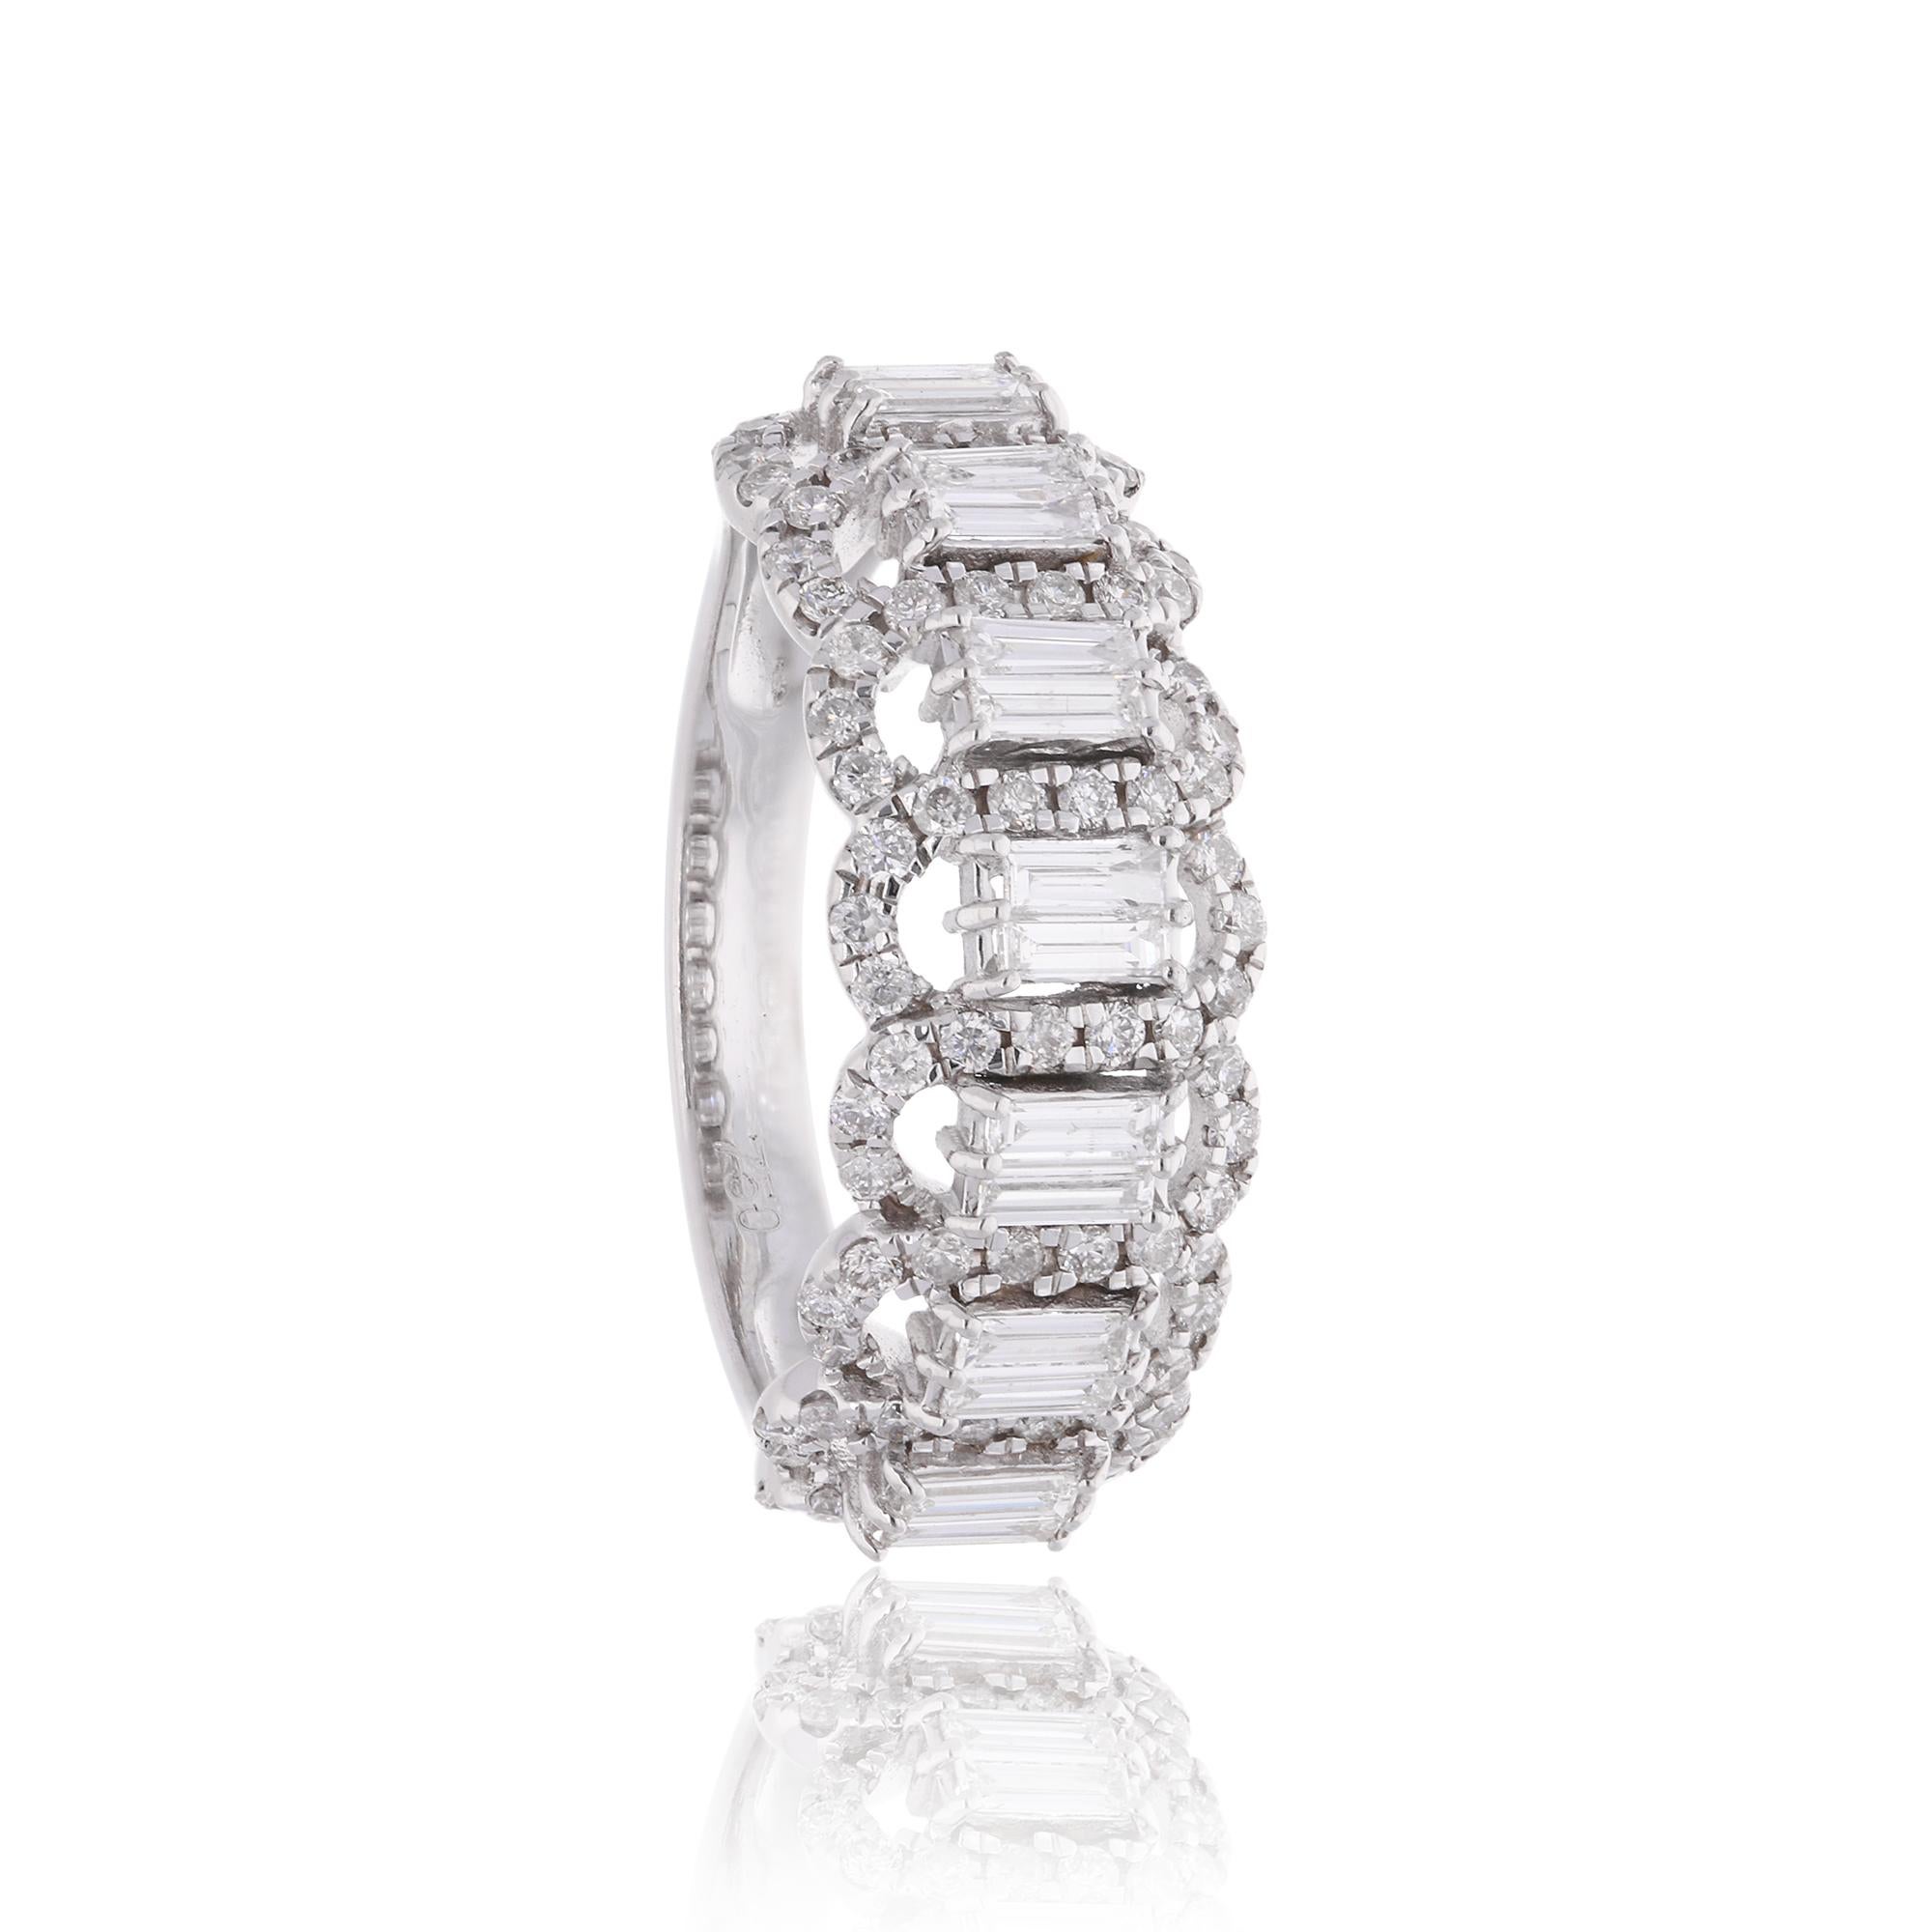 For Sale:  0.96 Carat SI Clarity HI Color Diamond Ring Solid 18k White Gold Fine Jewelry 3